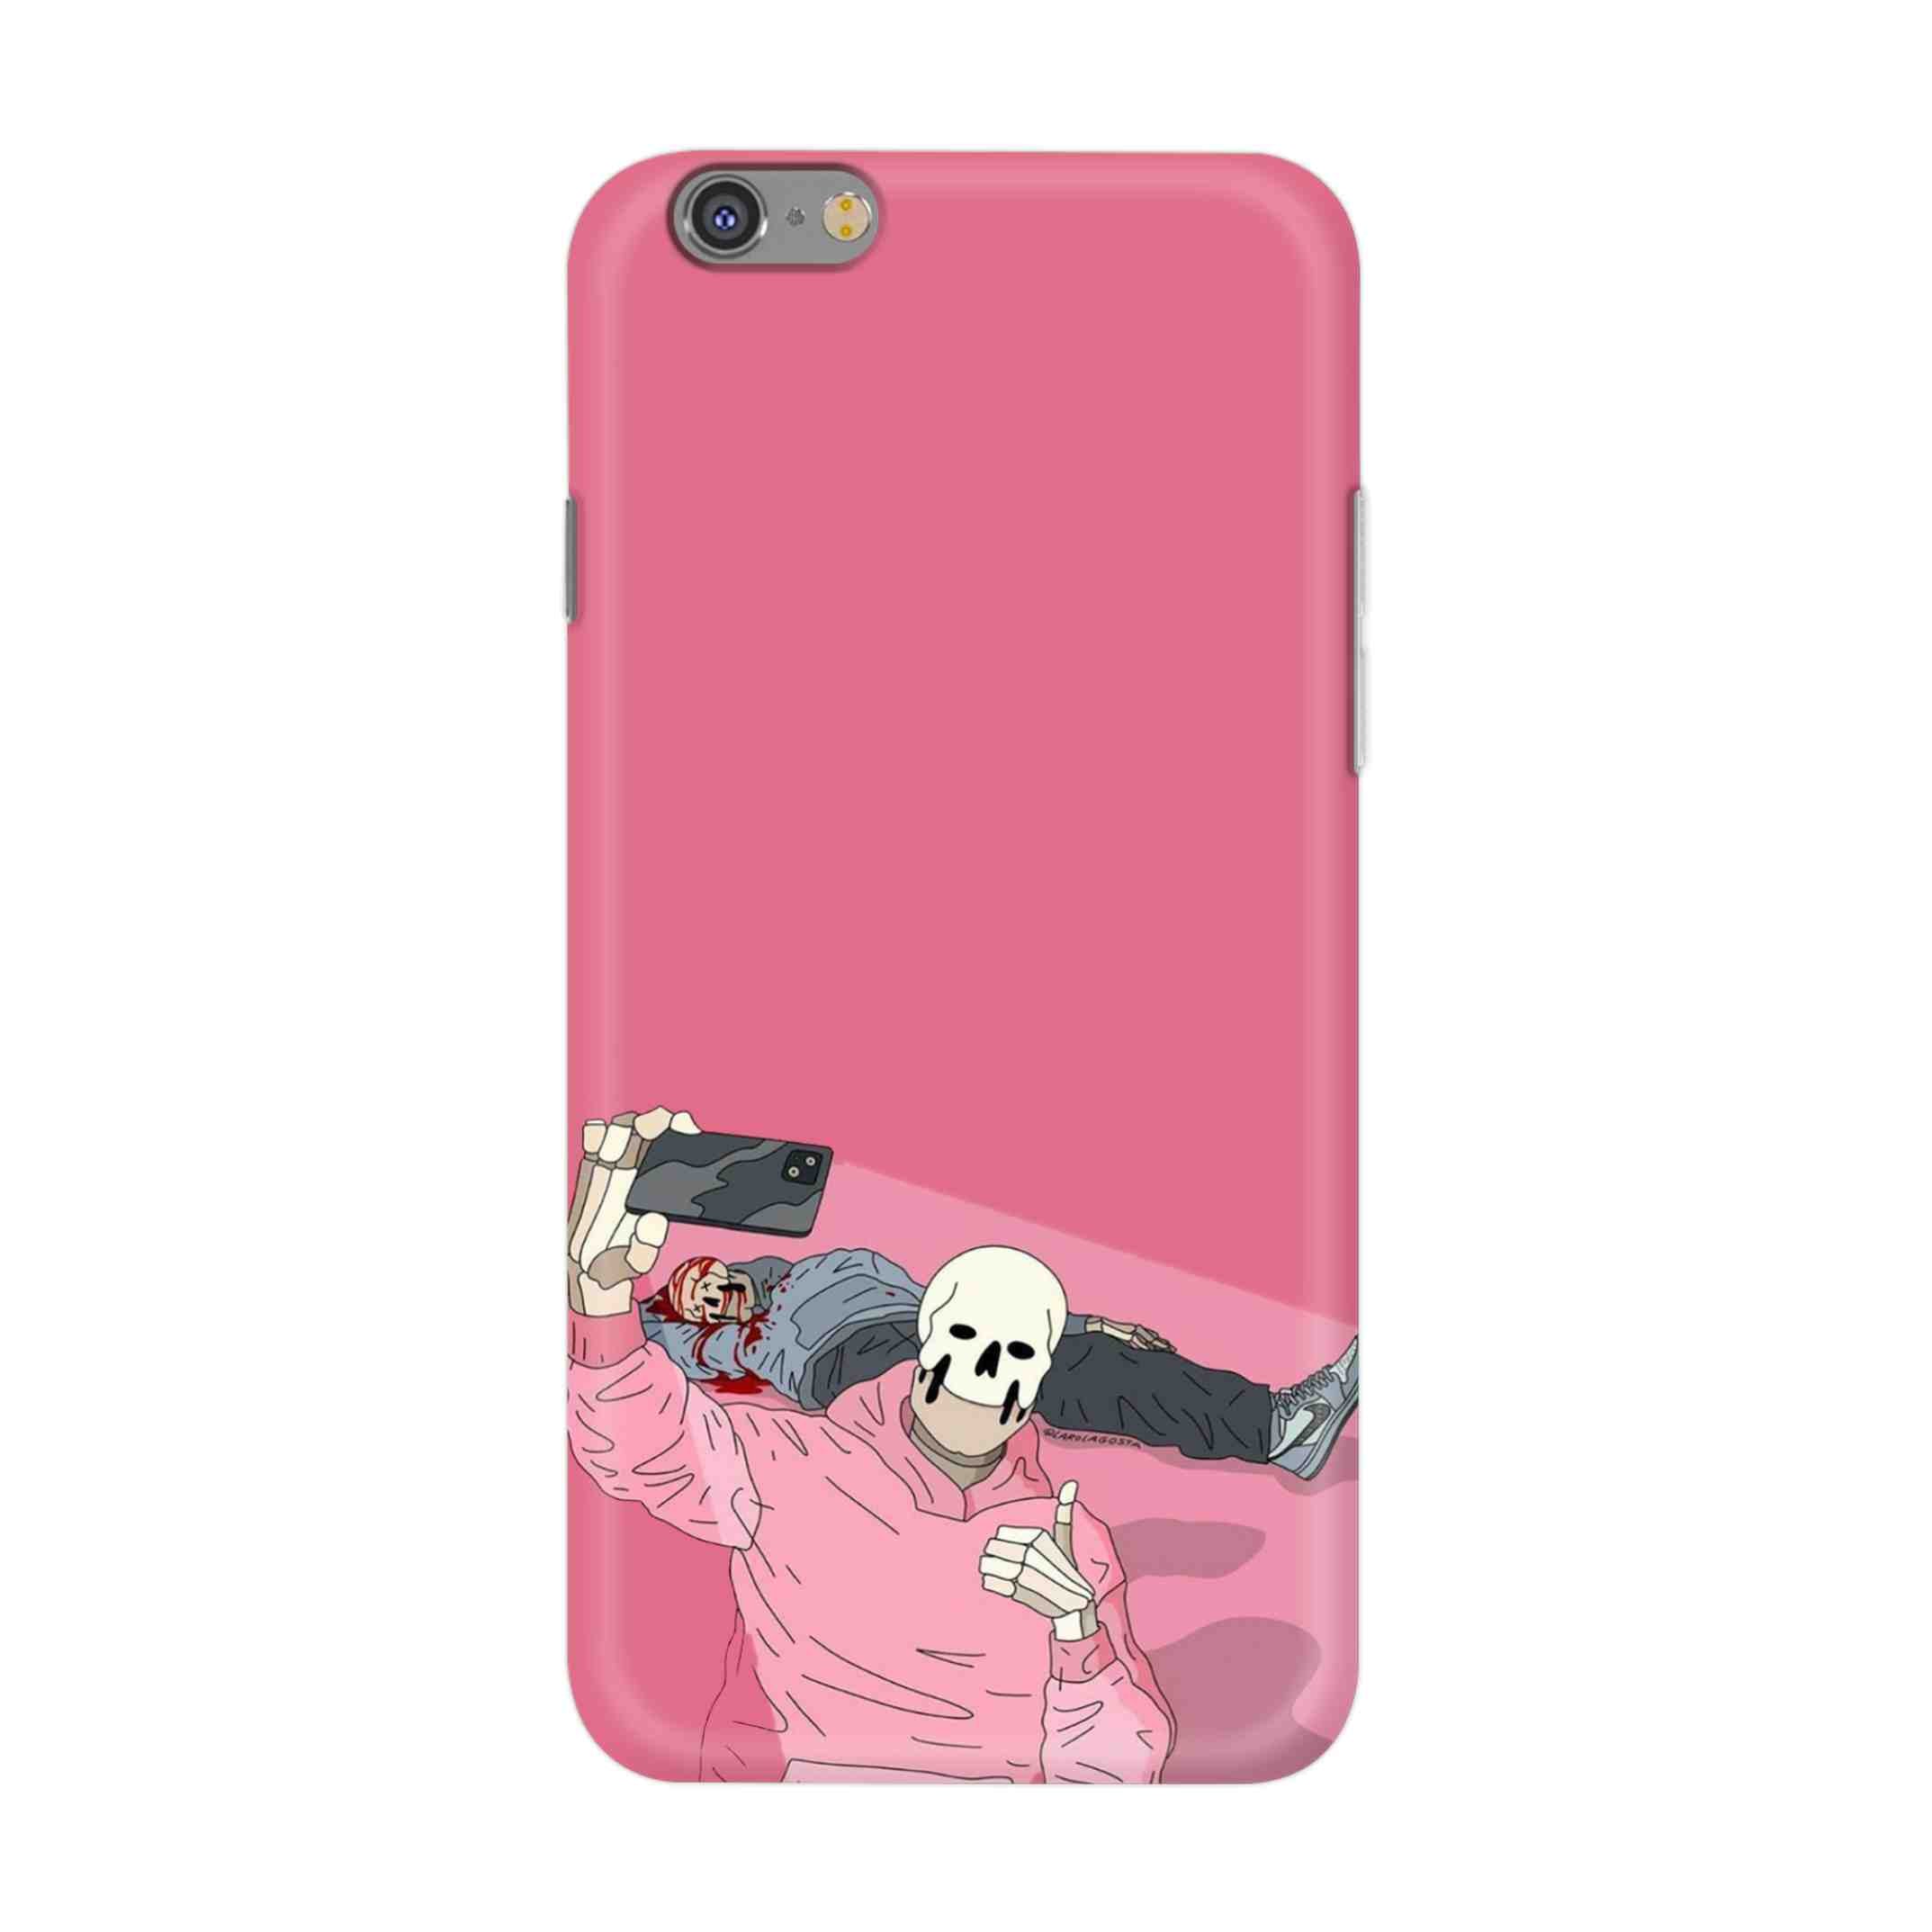 Buy Selfie Hard Back Mobile Phone Case/Cover For iPhone 6 / 6s Online